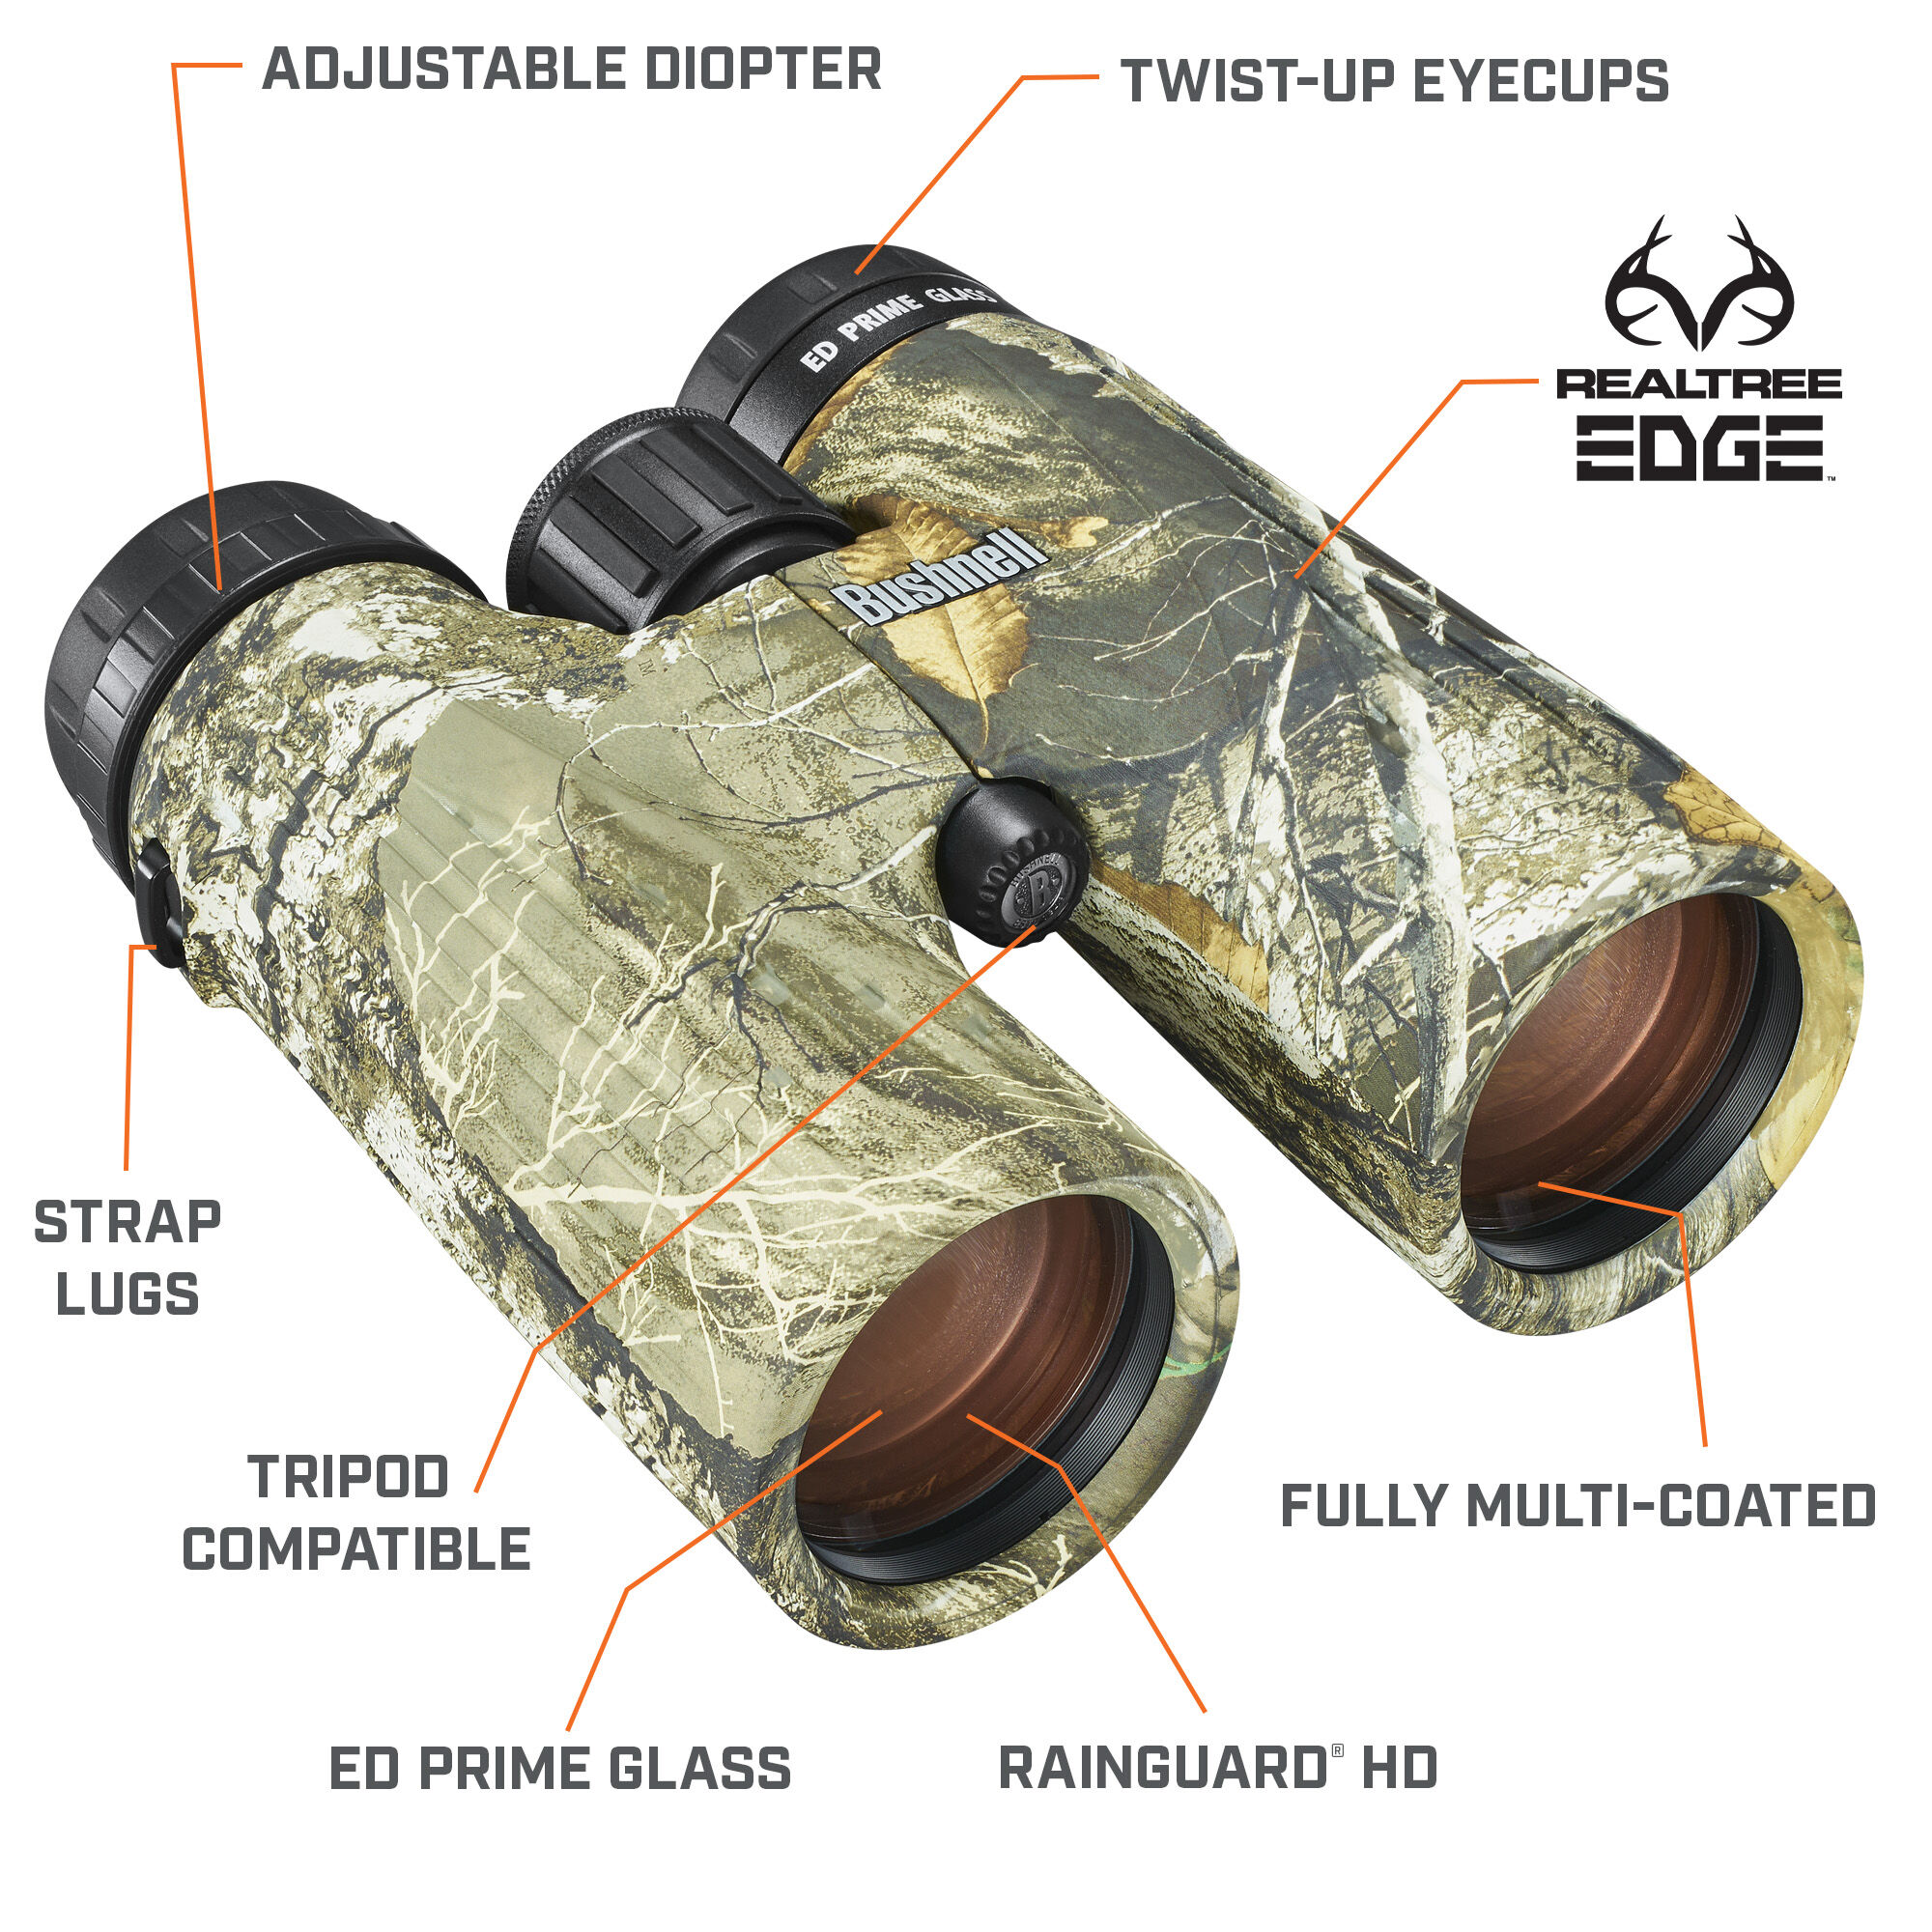 Buy Legend Binoculars and More. Shop Today For All of Your Outdoor 